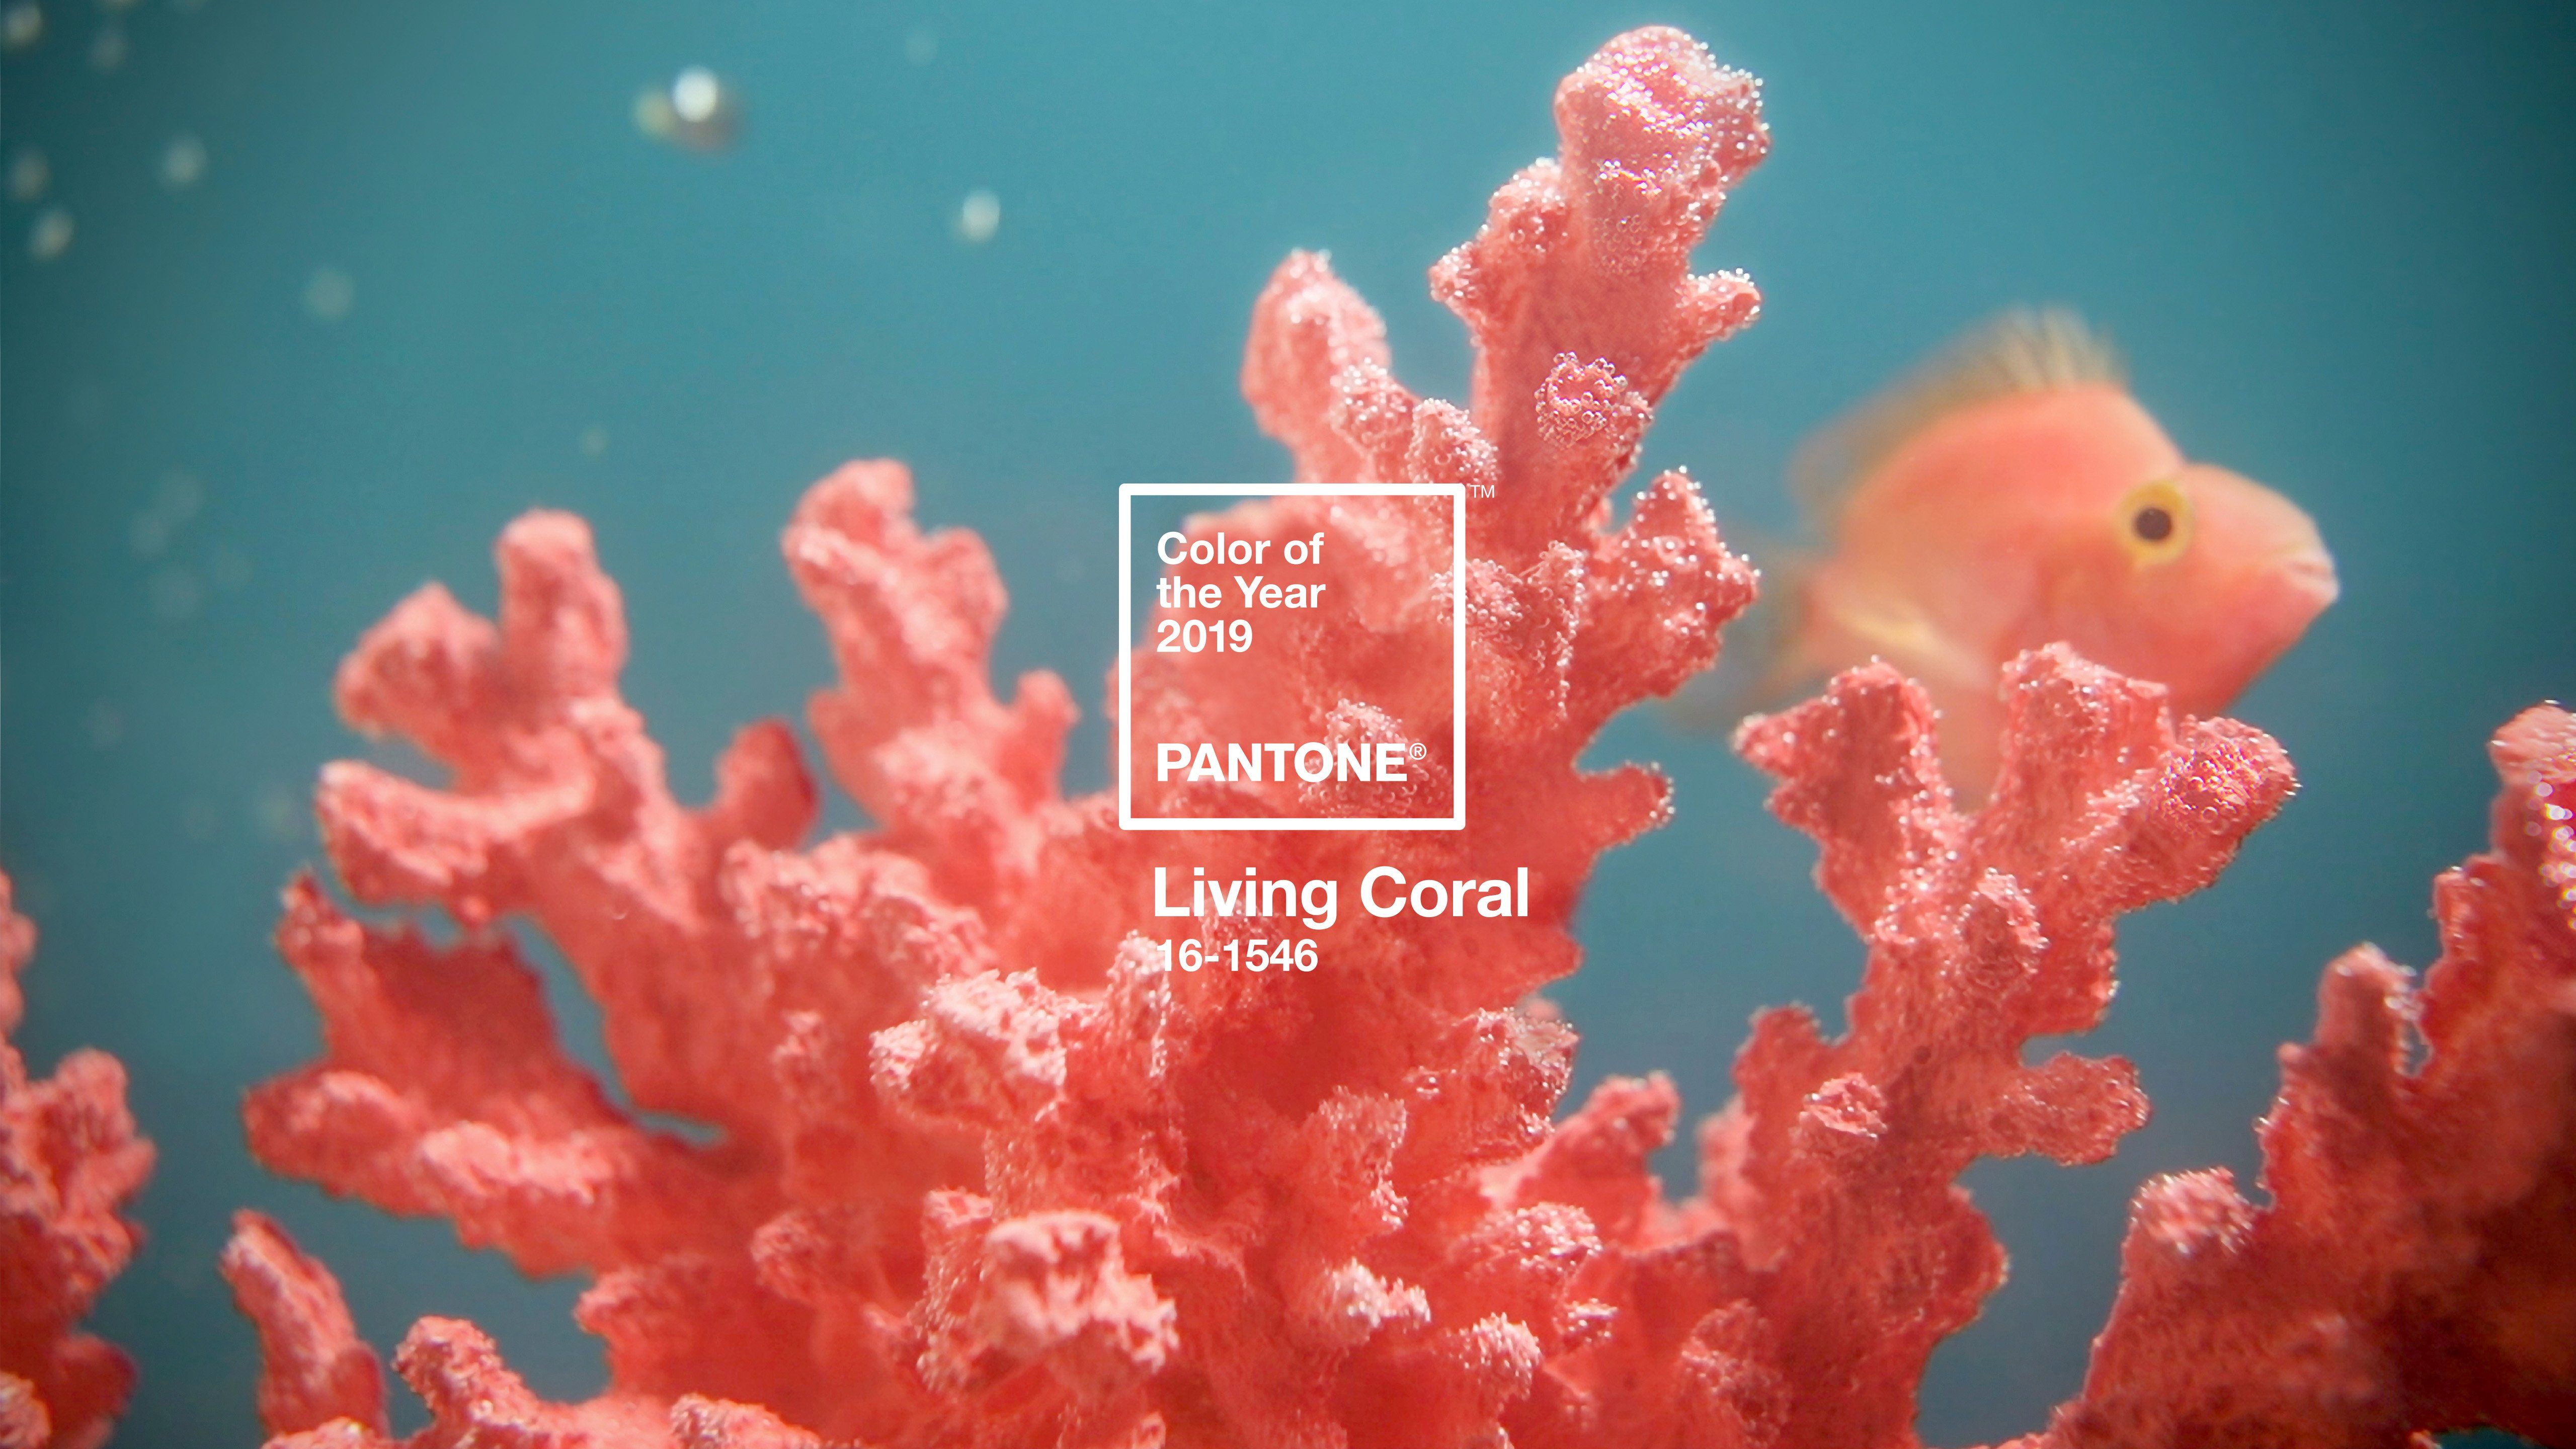 Coral 4K wallpaper for your desktop or mobile screen free and easy to download